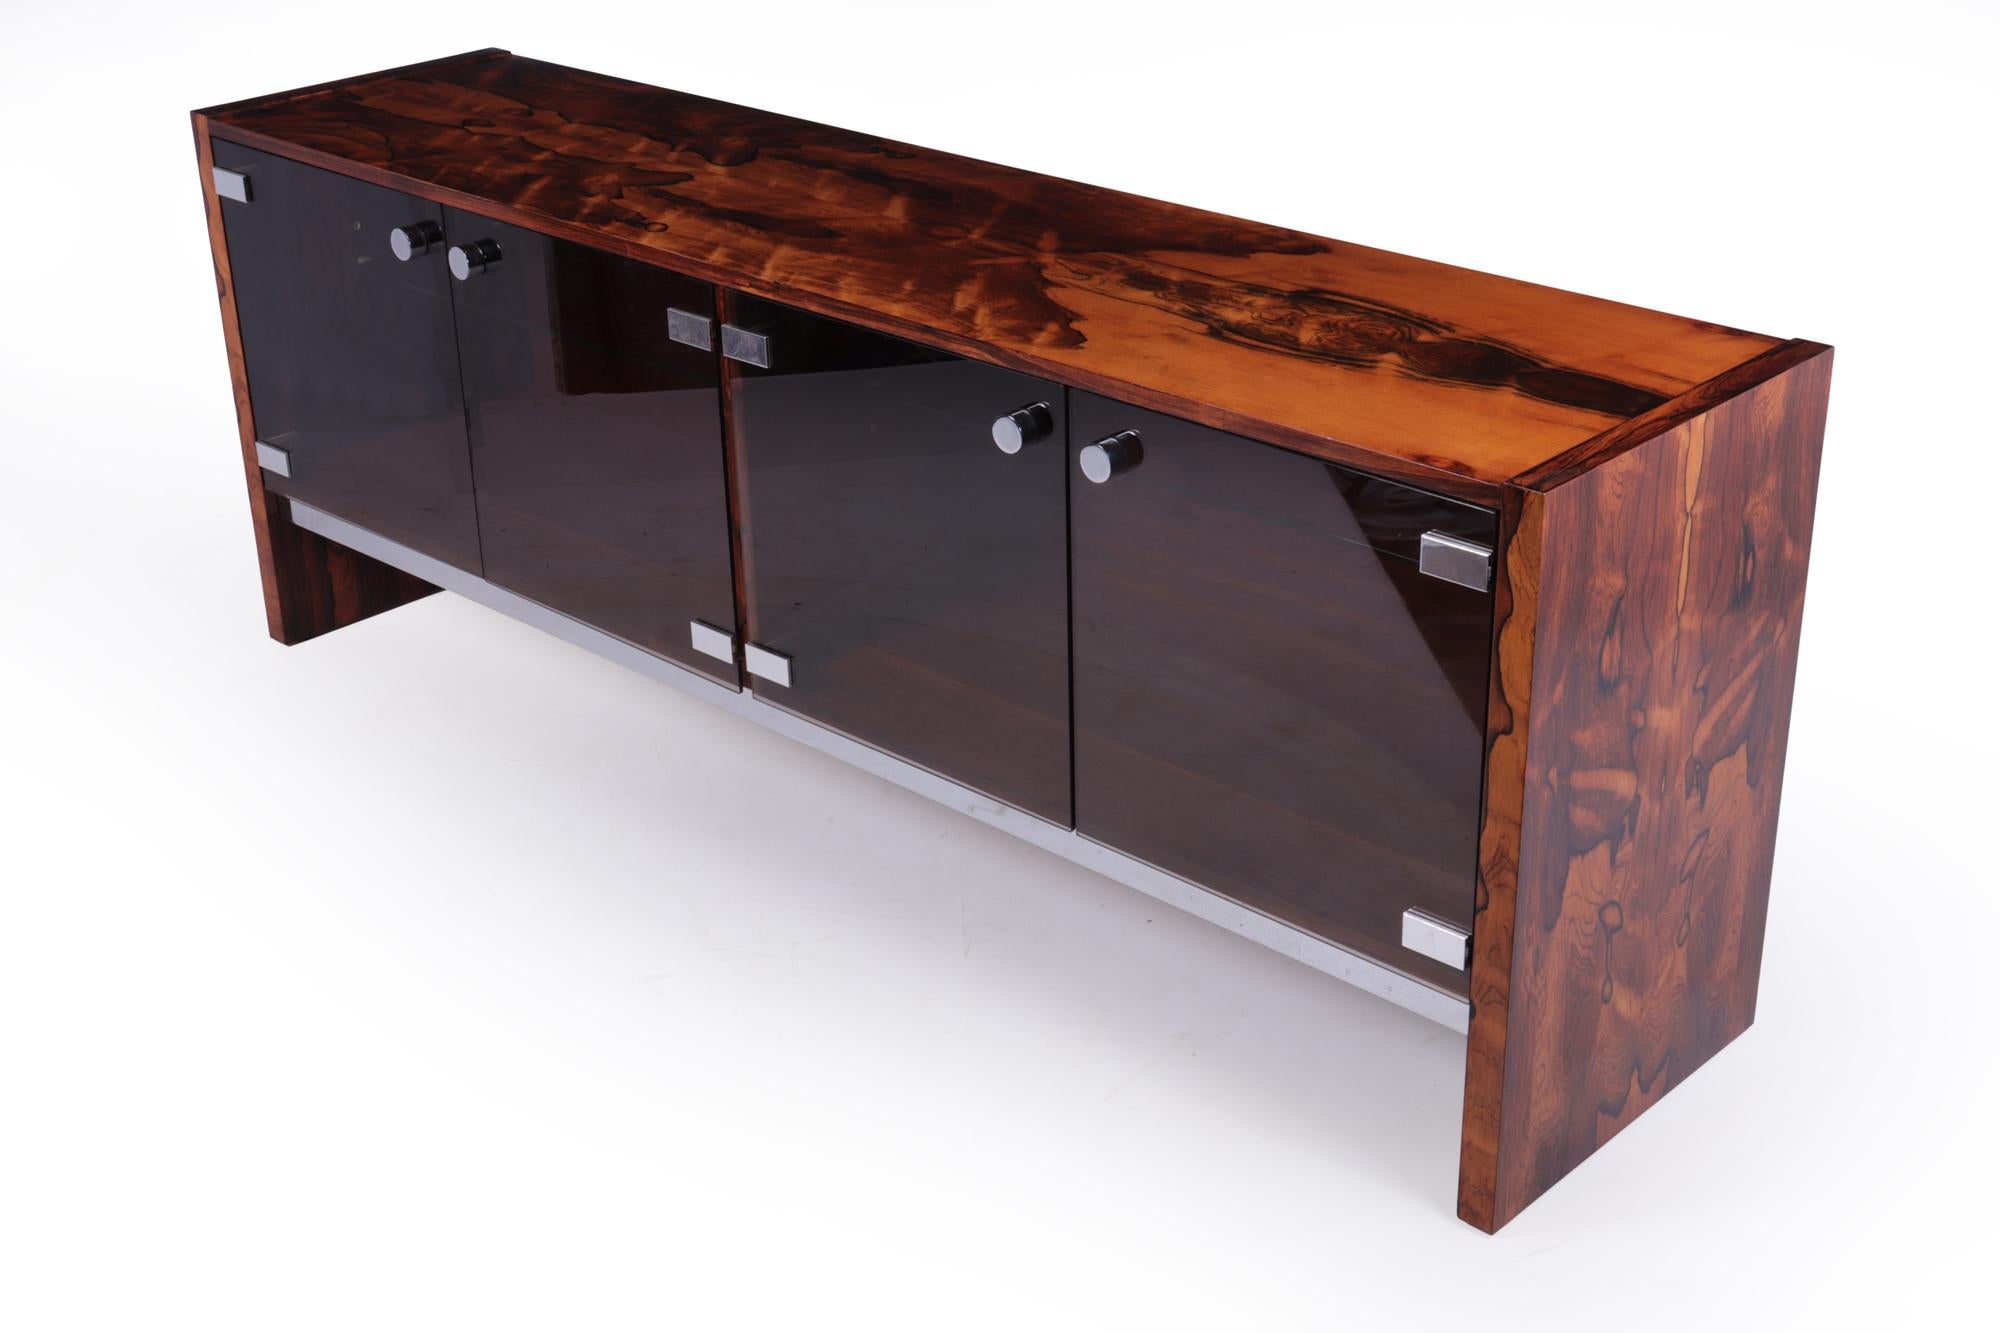 Wood sideboard by Merrow Associates c1960
Designed by Richard Young and produced by Merrow Associates having smoked glass doors with adjustable glass shelves behind. This sideboard has been produced in the finest quality Rosewood veneer with chrome